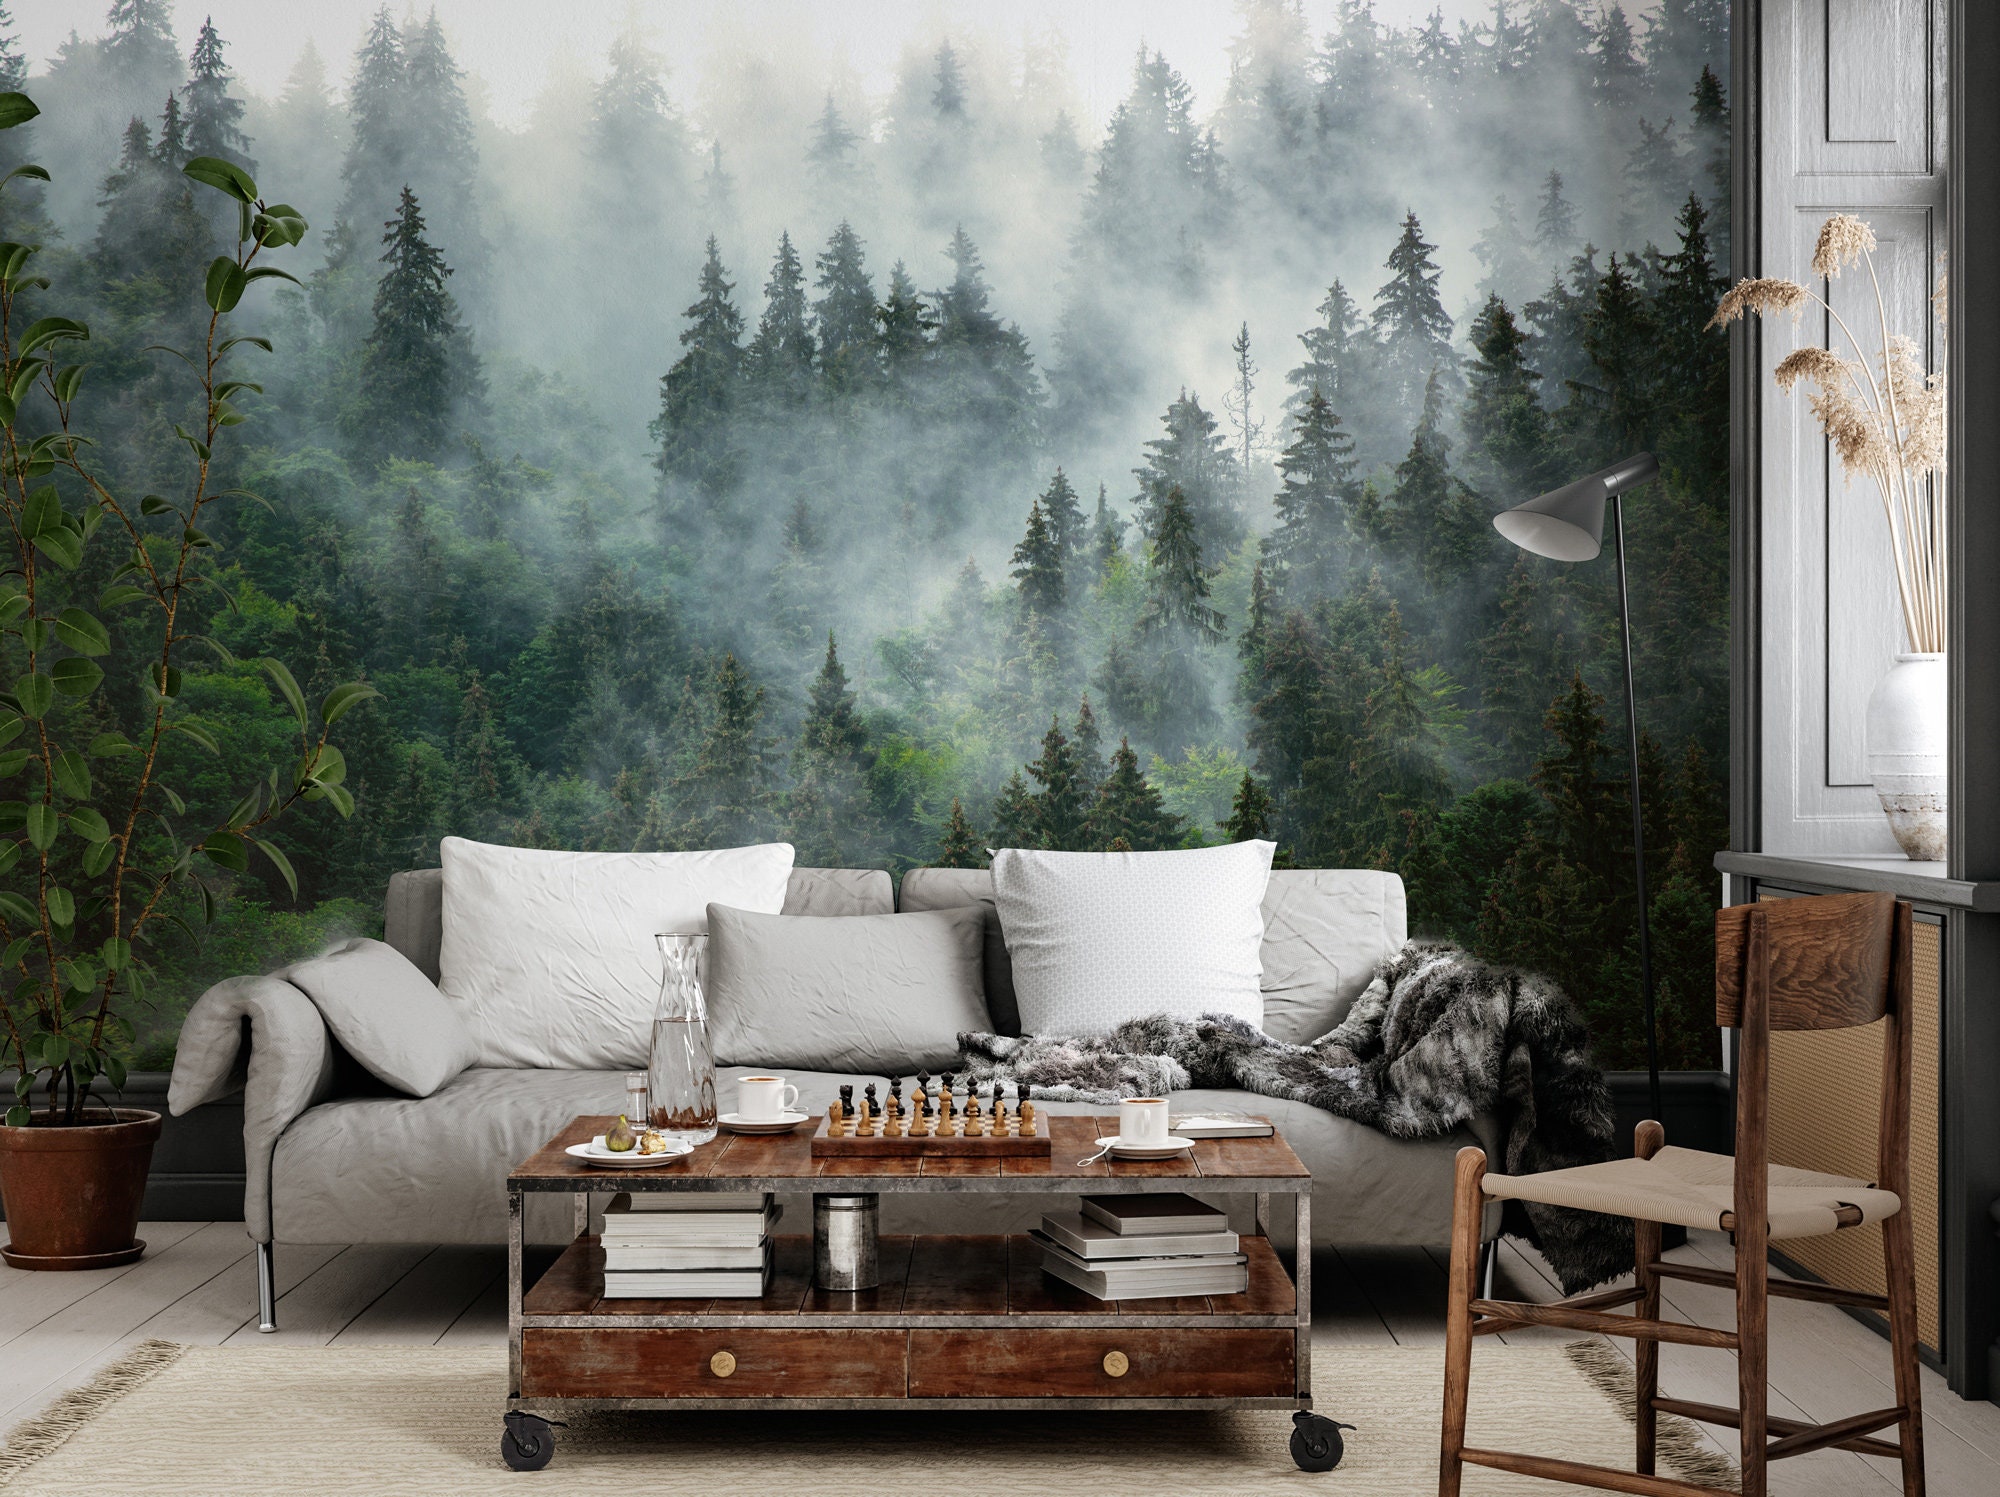 Buy Envouge Wallpaper Bamboo Forest 3D Design Washable 3ft X 2ft for  BedroomLiving Room Online at Low Prices in India  Amazonin